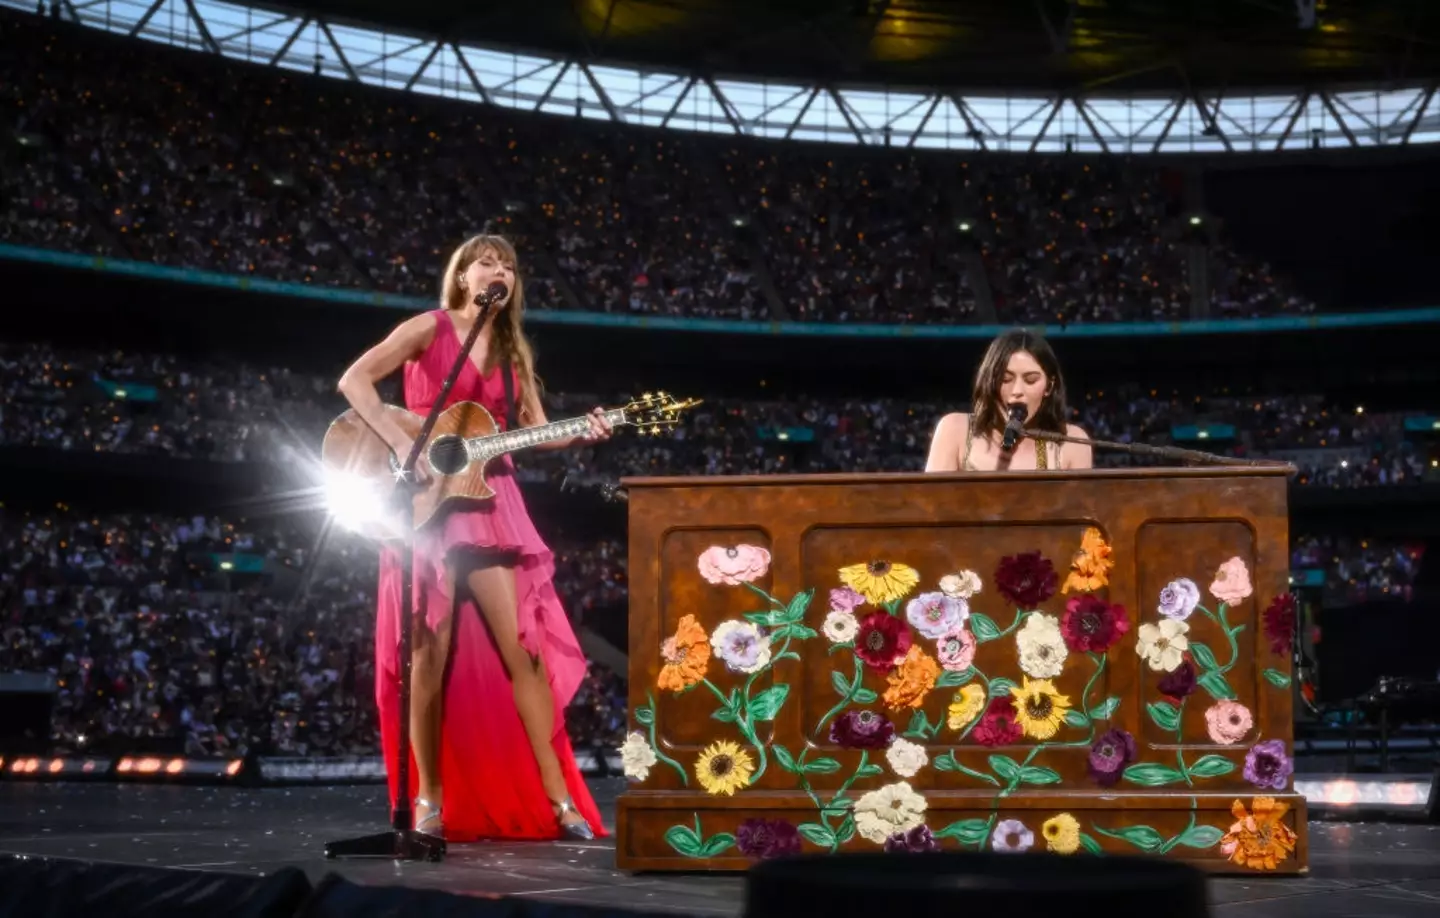 Taylor Swift and Gracie Abrams on stage in London last month (June 23). (Gareth Cattermole/TAS24 / Contributor/Getty Images)